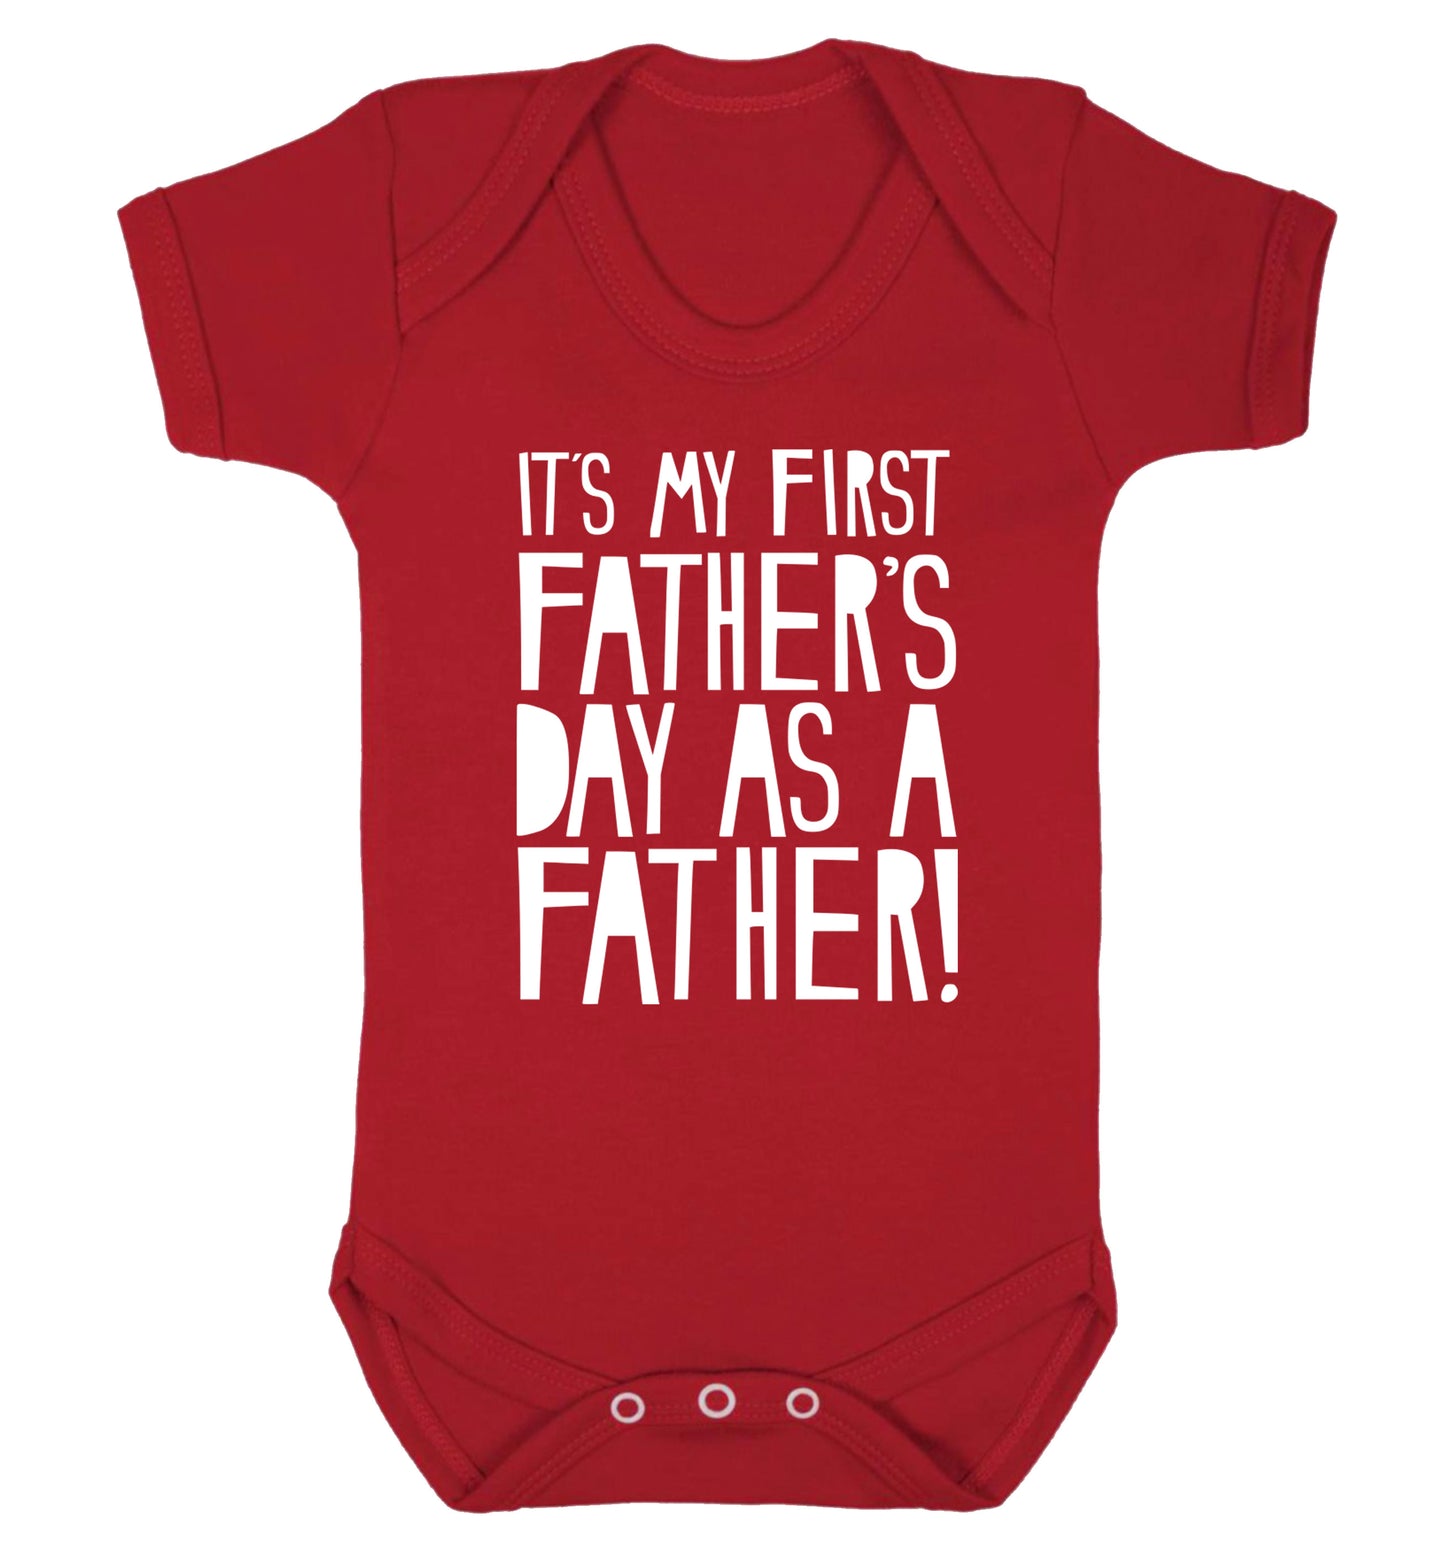 It's my first Father's Day as a father! Baby Vest red 18-24 months